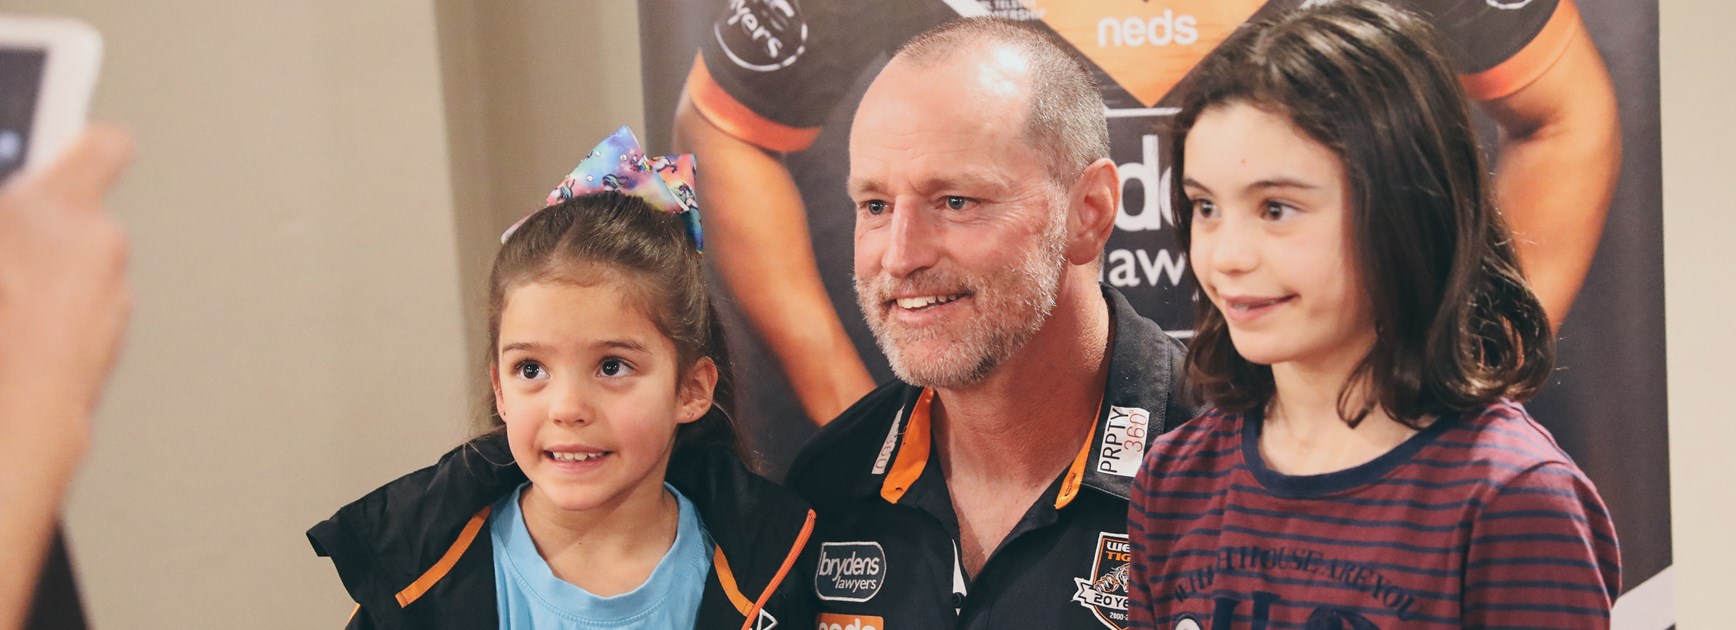 Join Wests Tigers on the road in Brisbane this year!